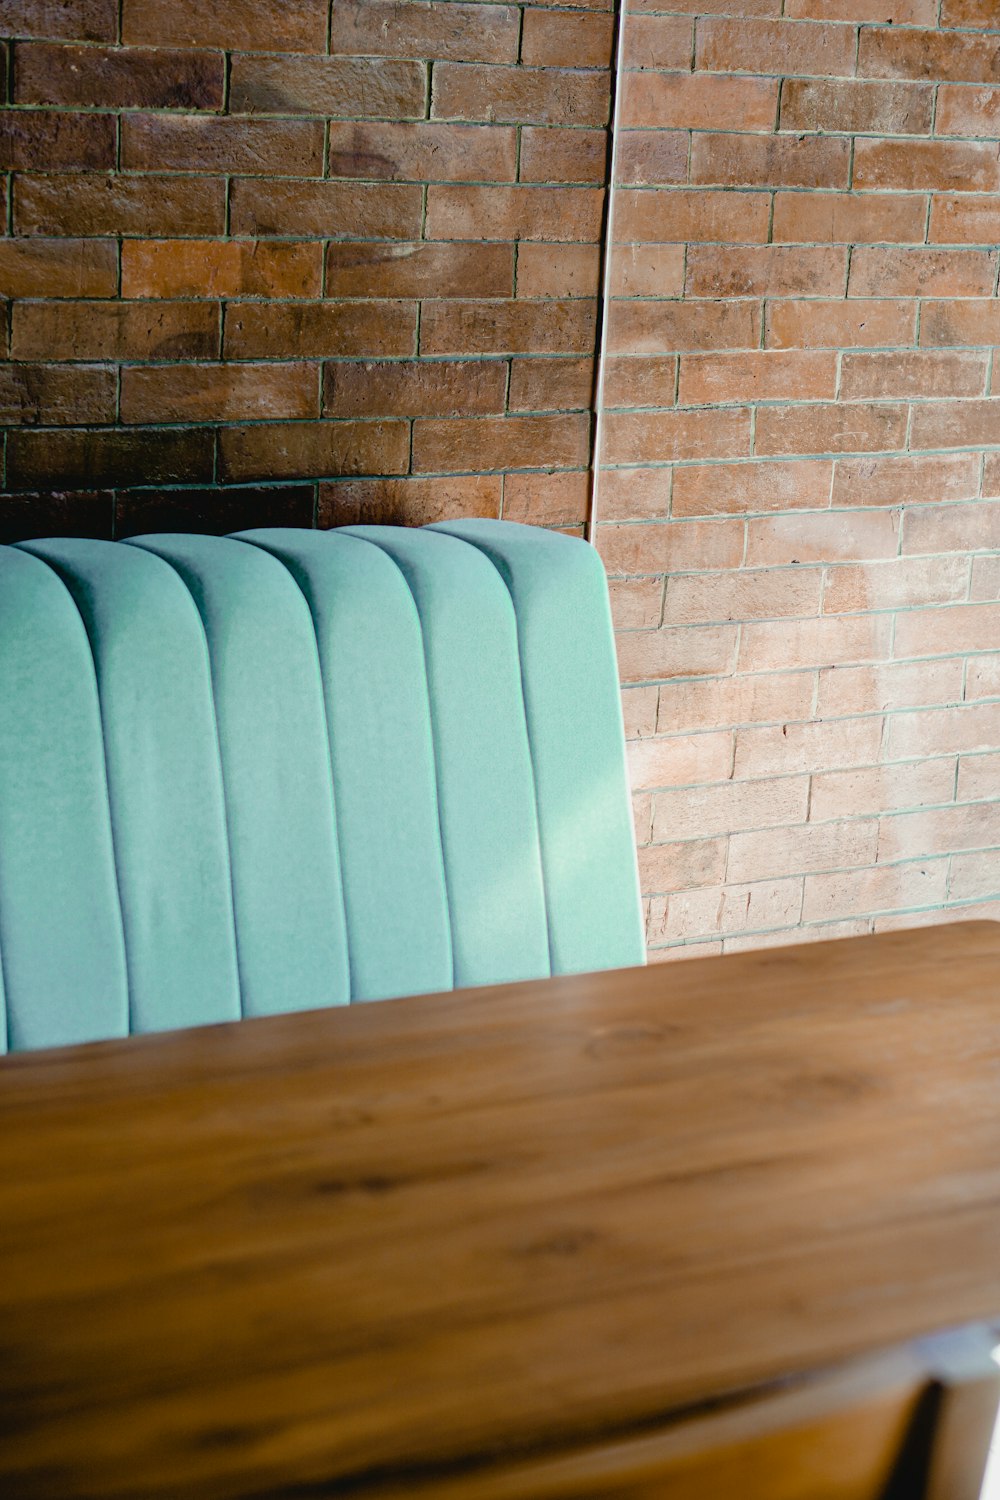 a wooden table with a blue chair next to a brick wall